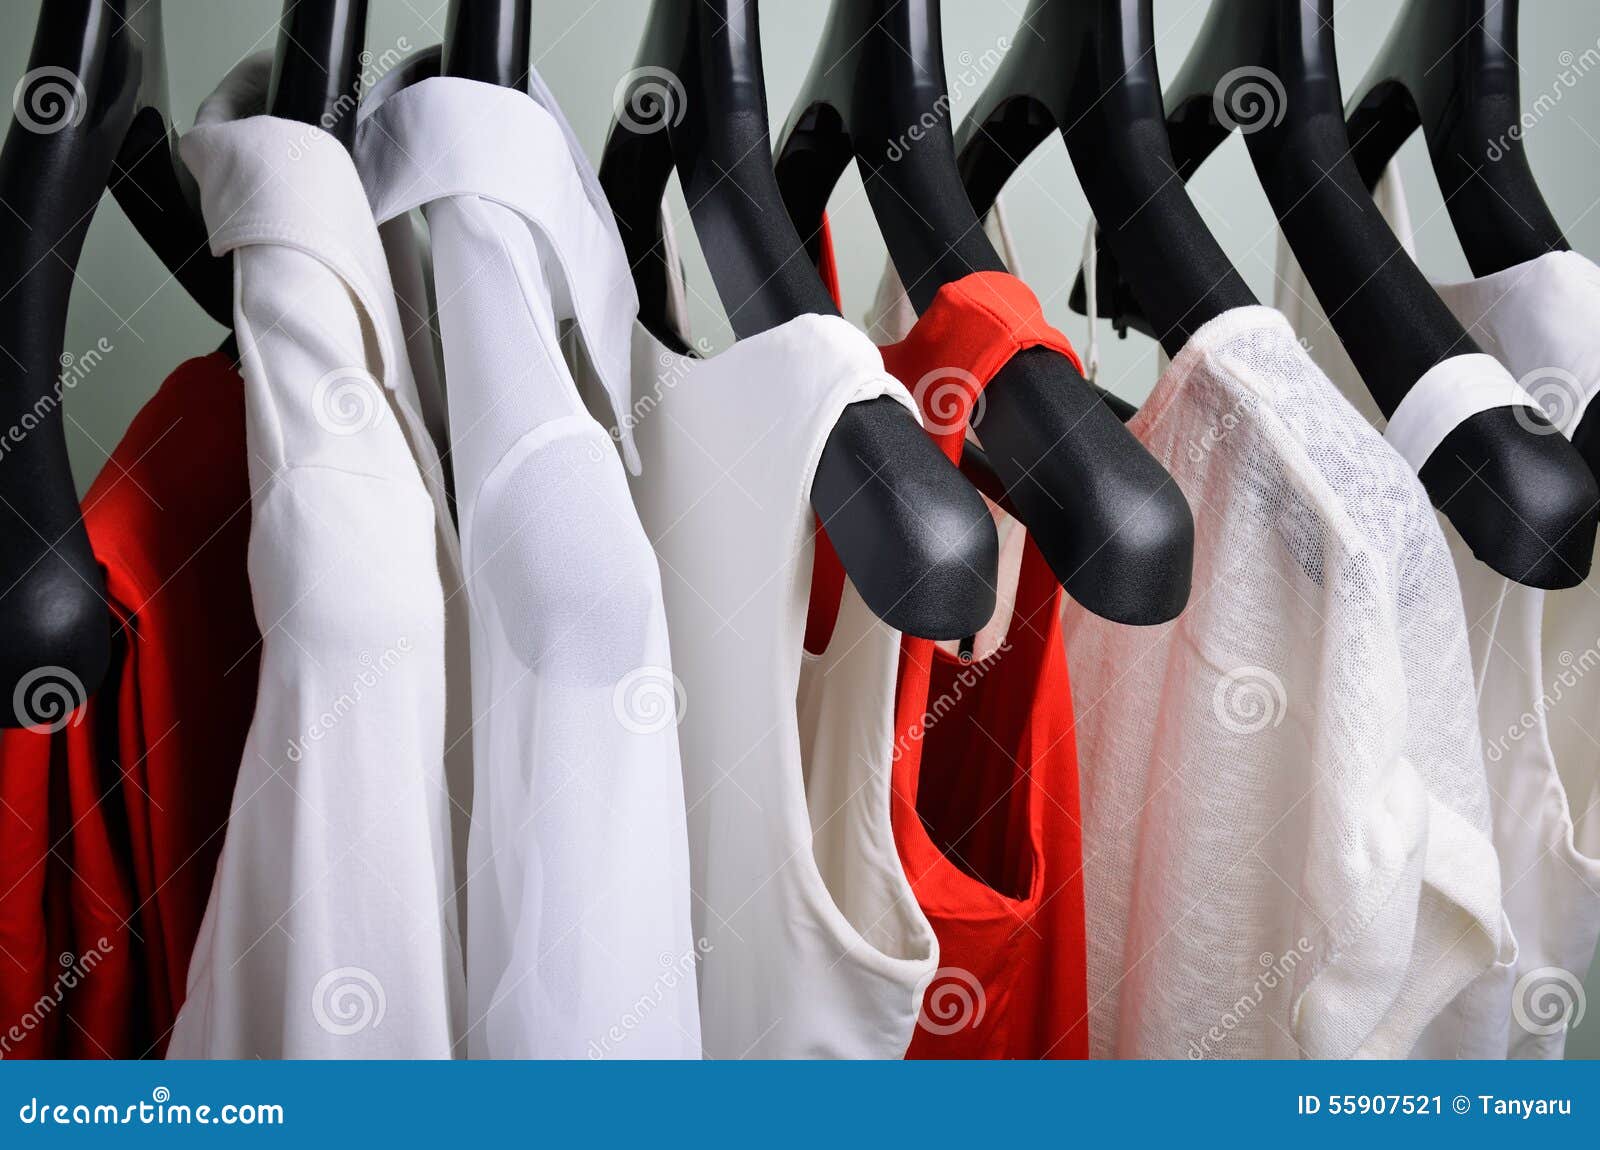 White and Coral Womens Clothing Hanging Horizontal Stock Image - Image ...